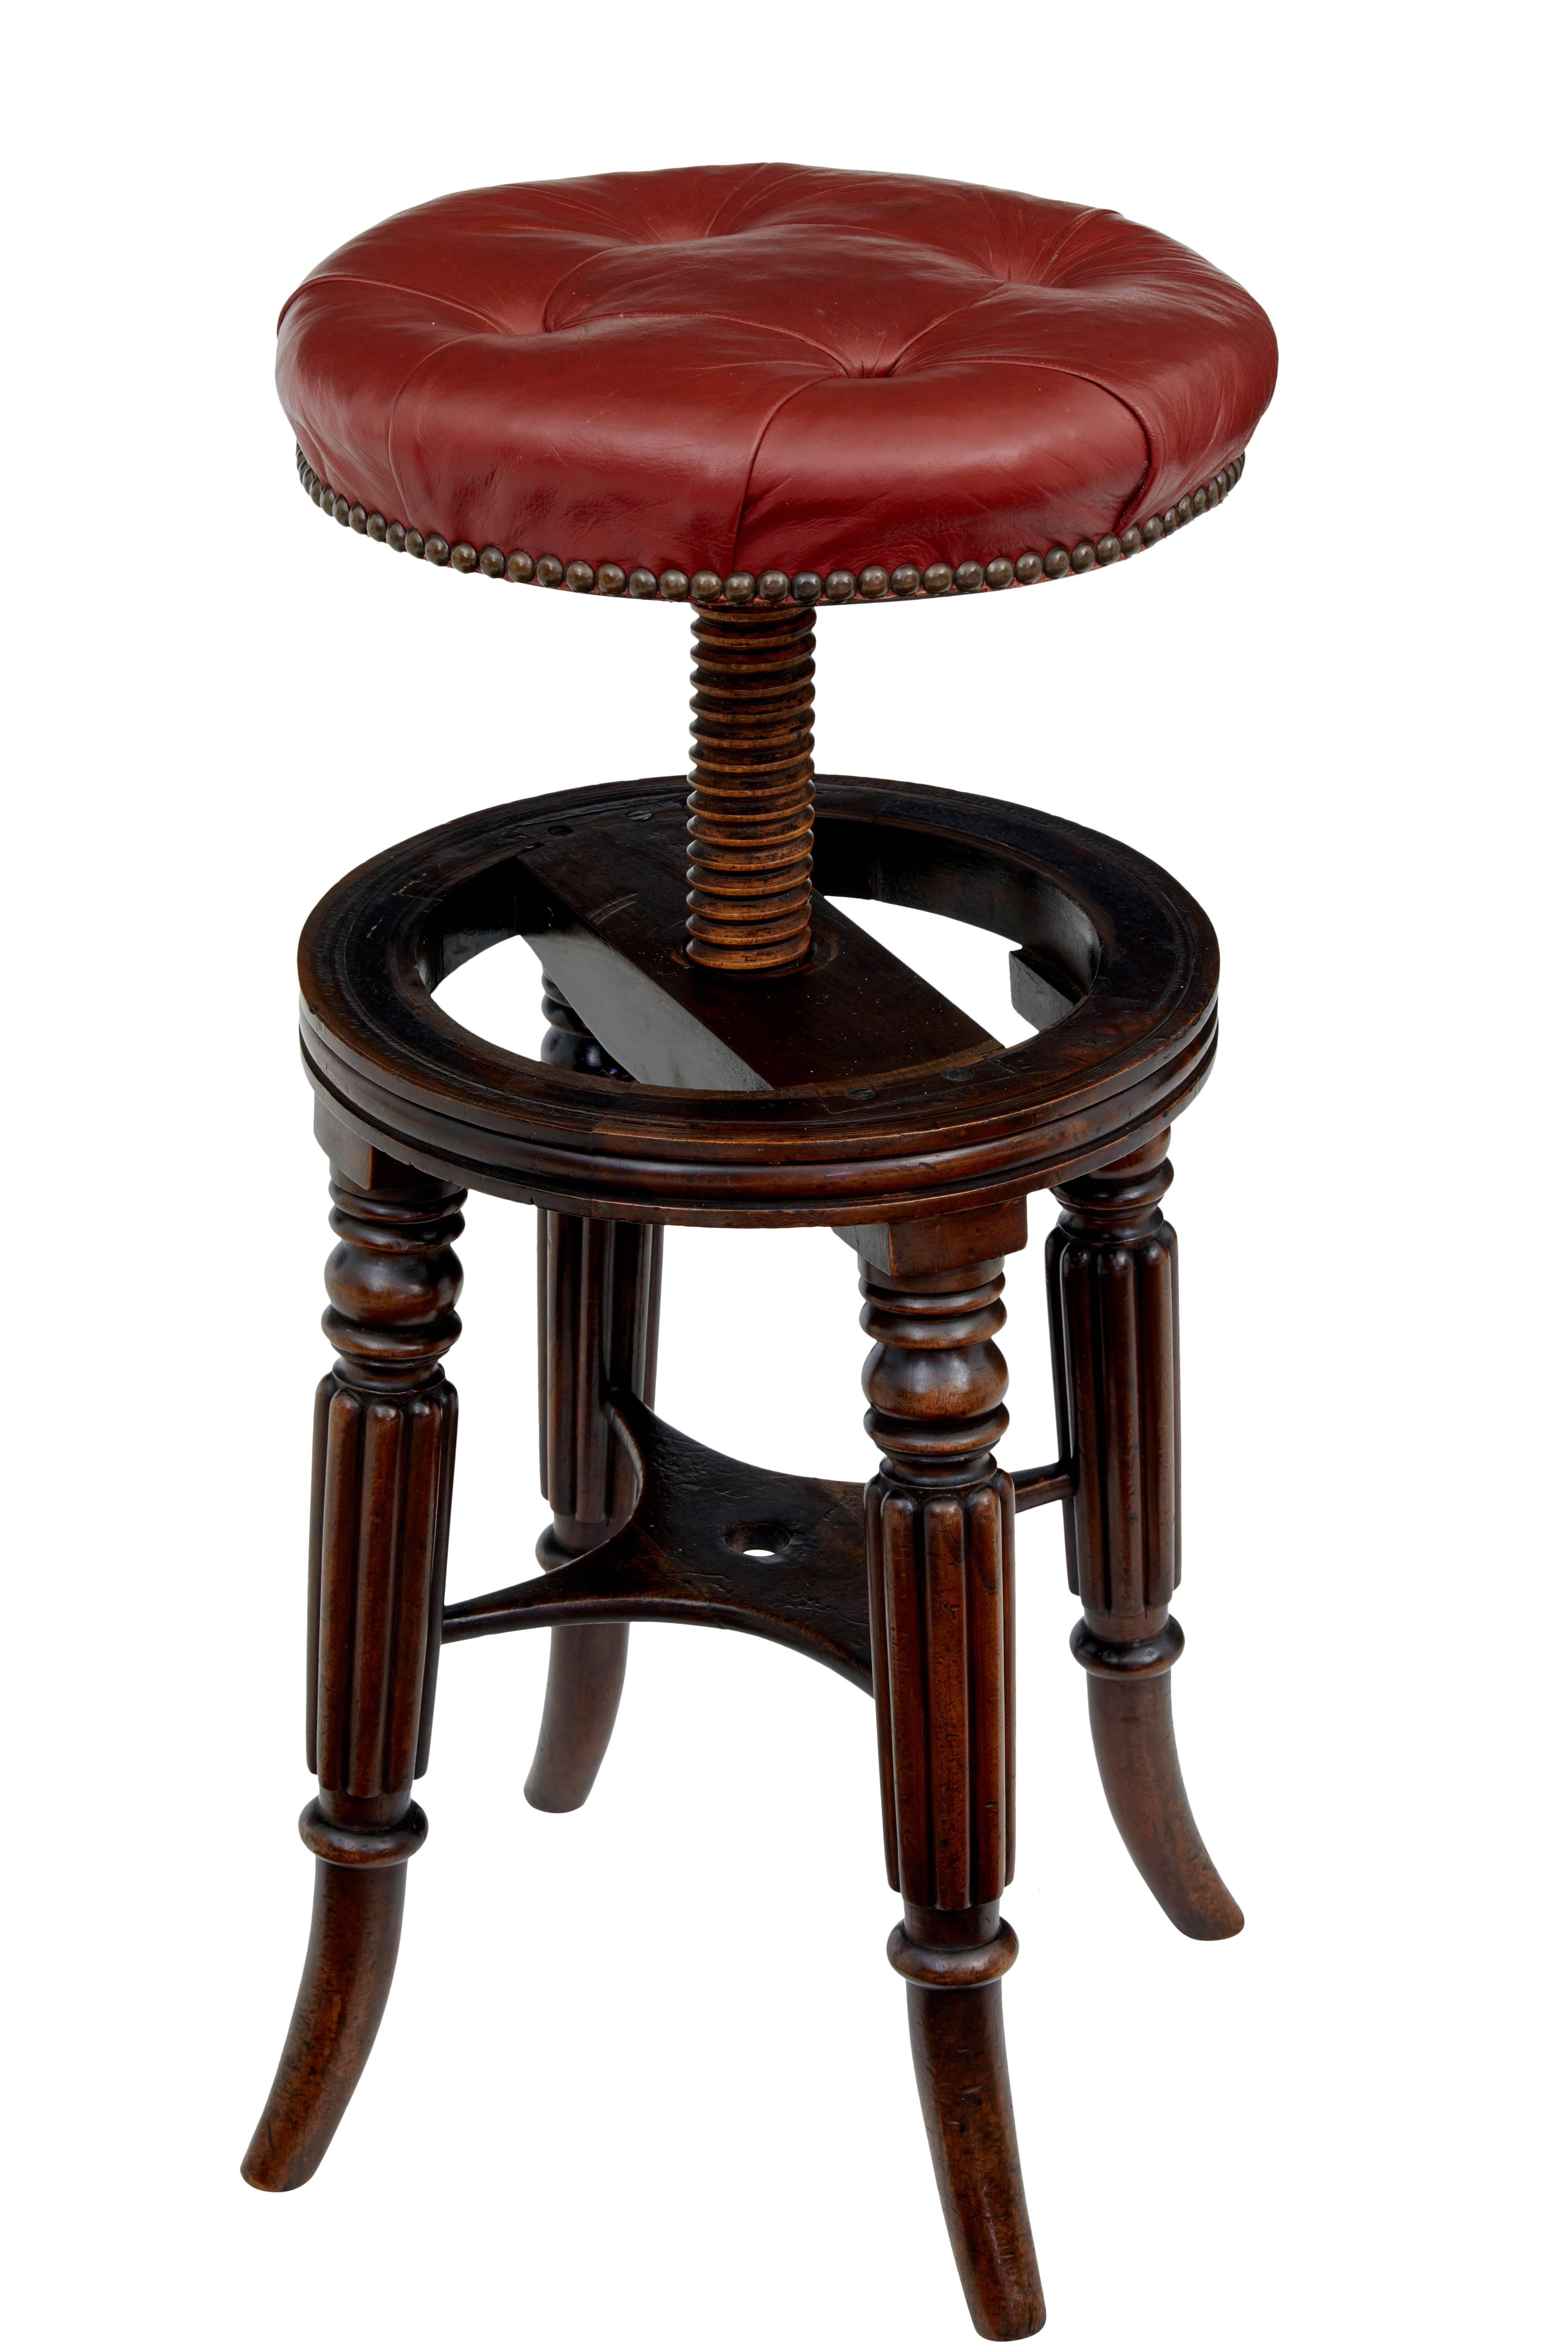 Victorian mahogany adjustable piano stool, circa 1890.

Buttoned red leather seat which rises by turning, seat height at lowest level is 19